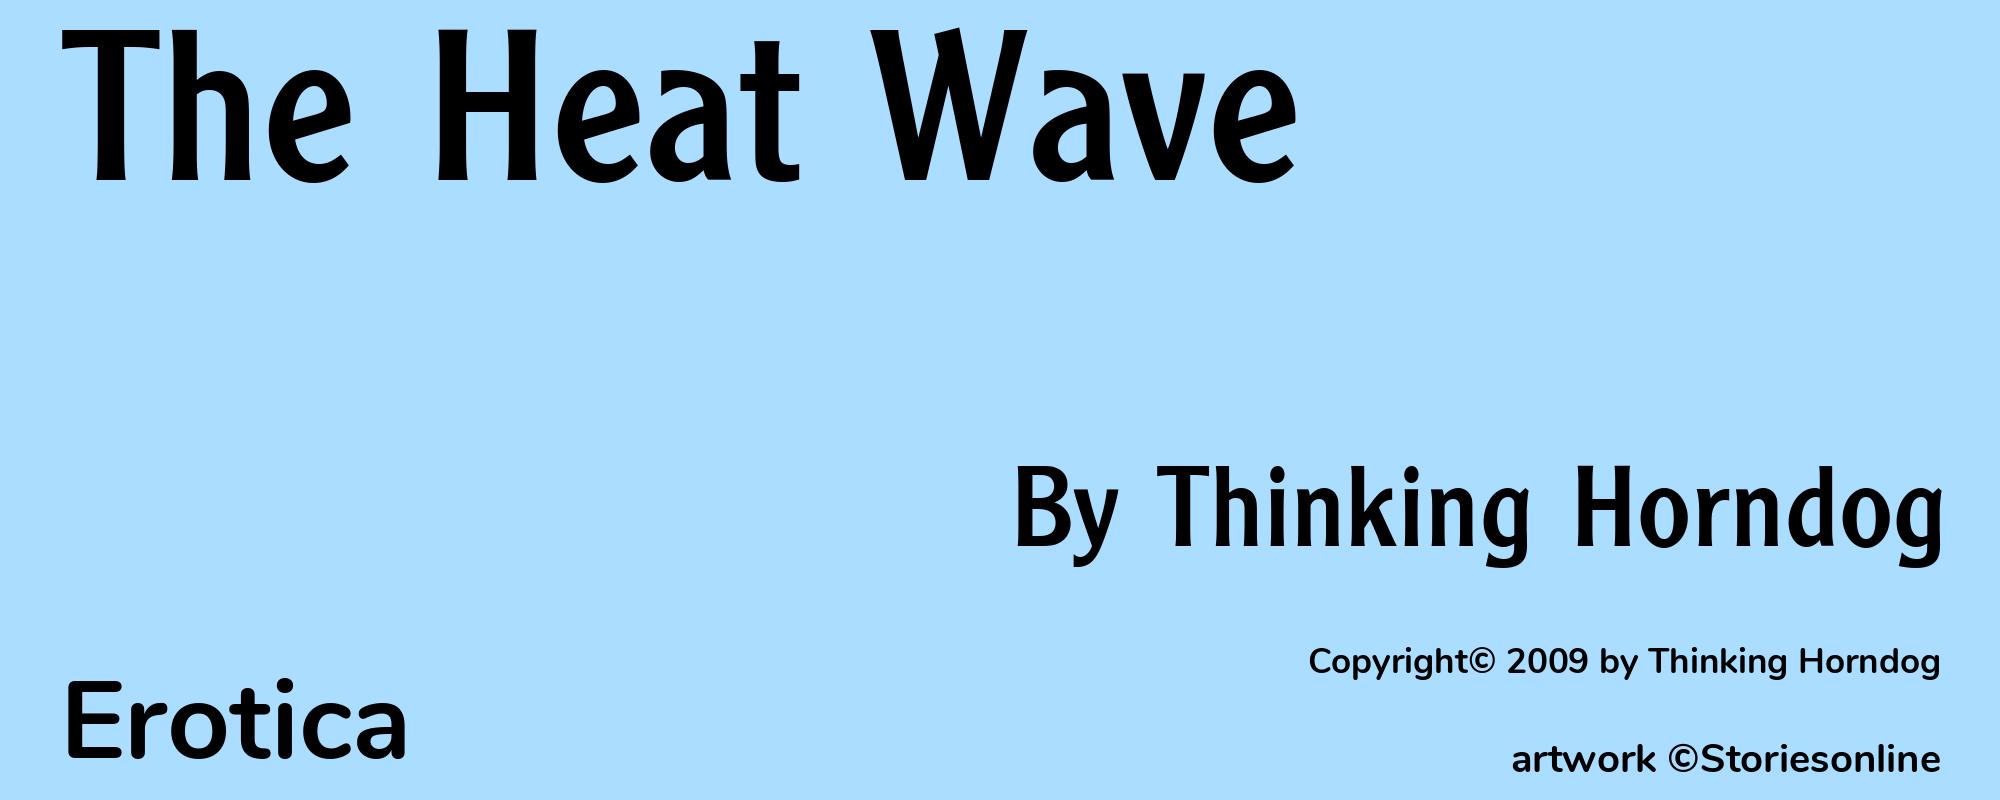 The Heat Wave - Cover